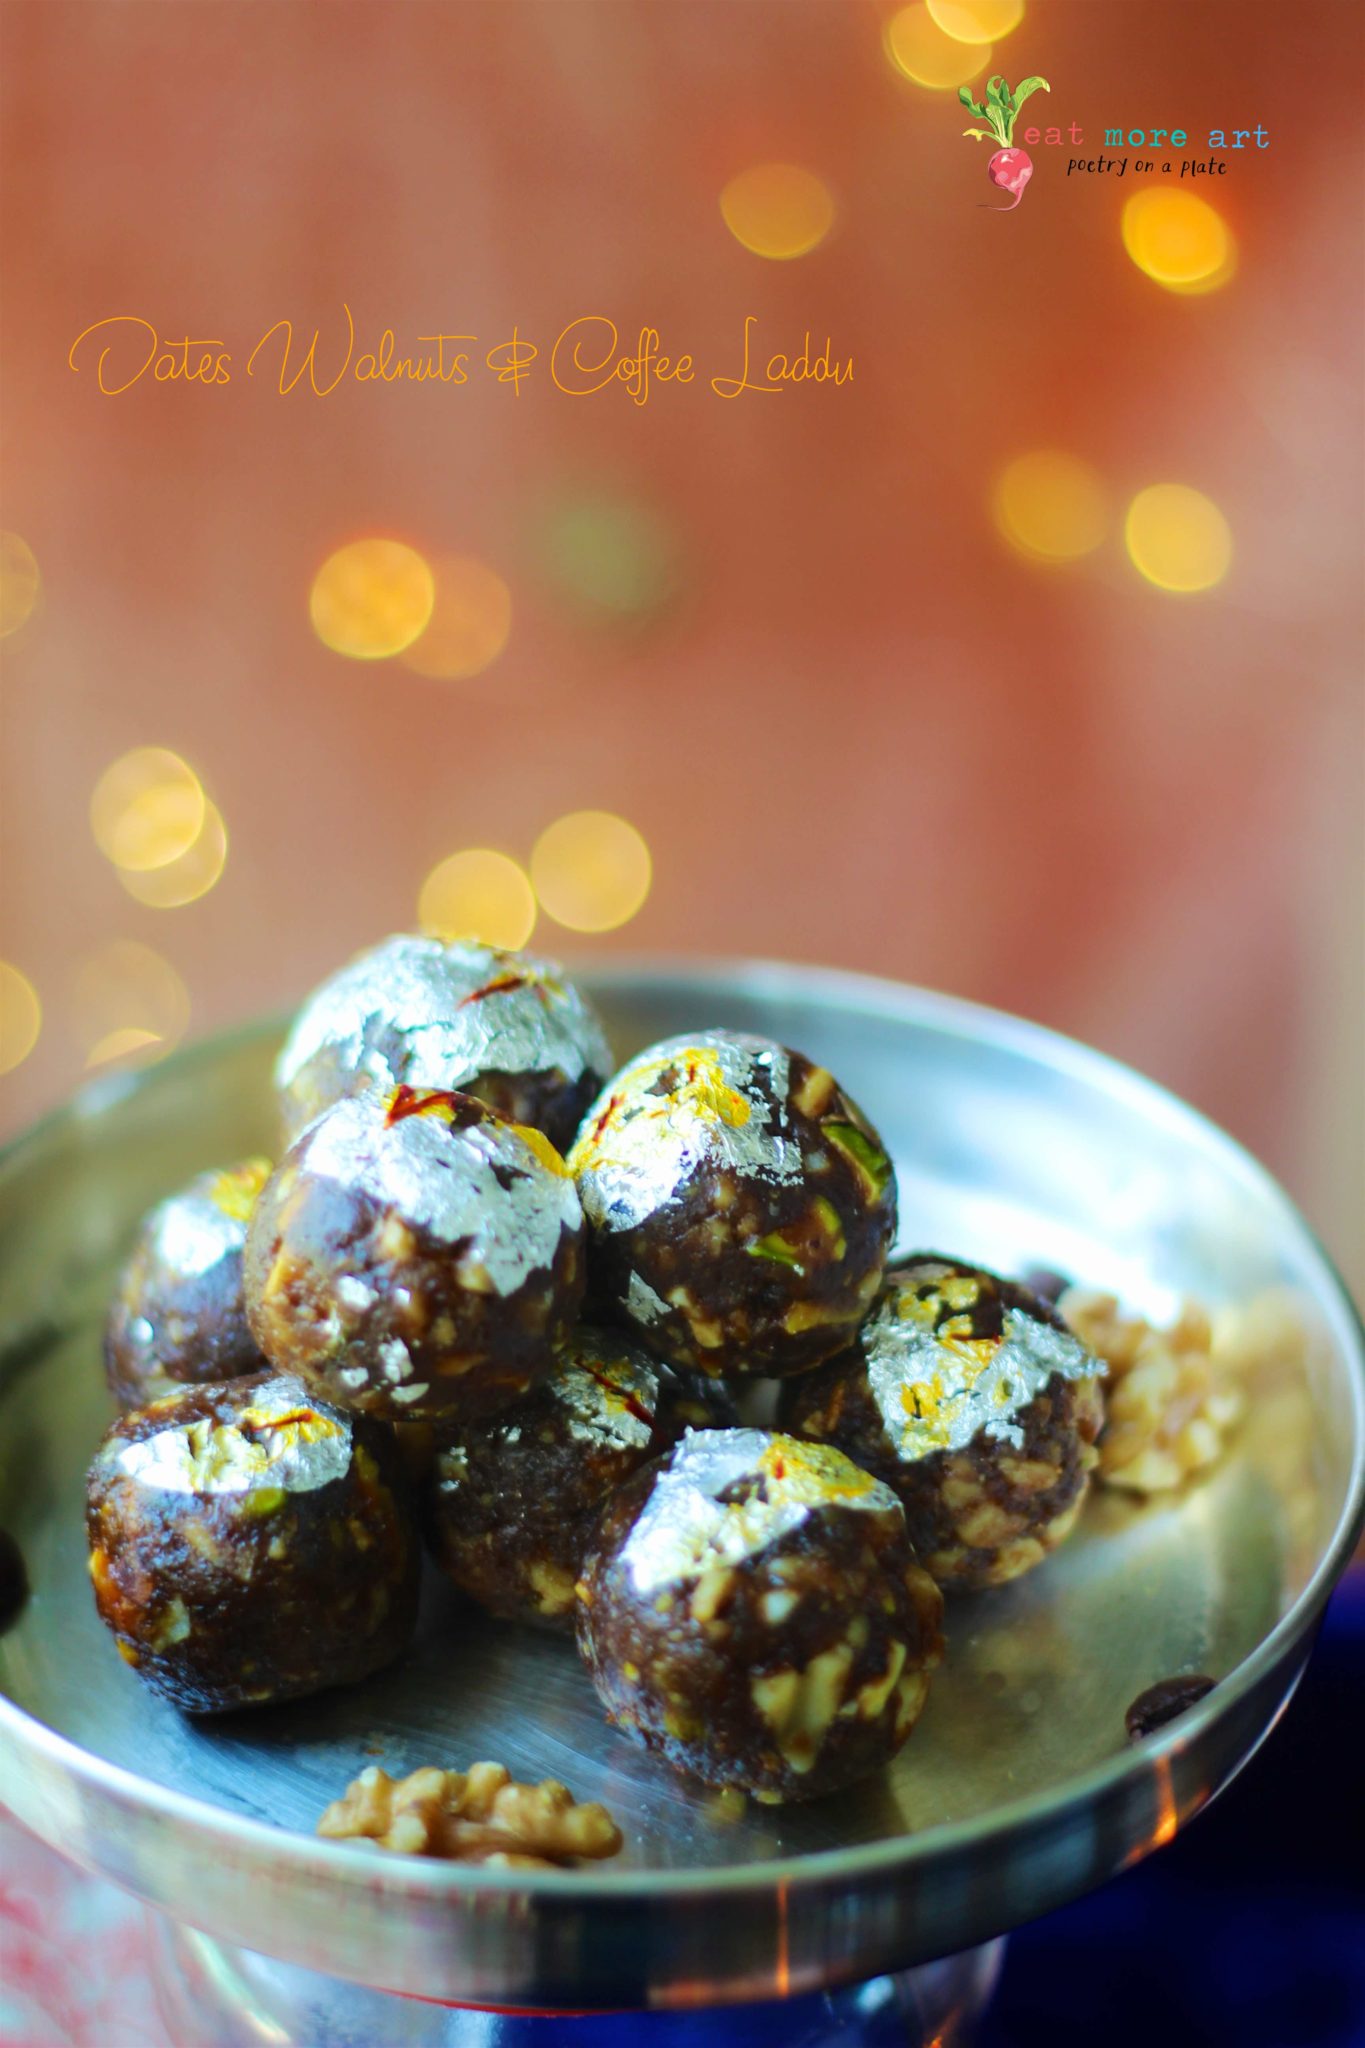 A side shot of dates walnuts coffee laddu with bokeh in the background